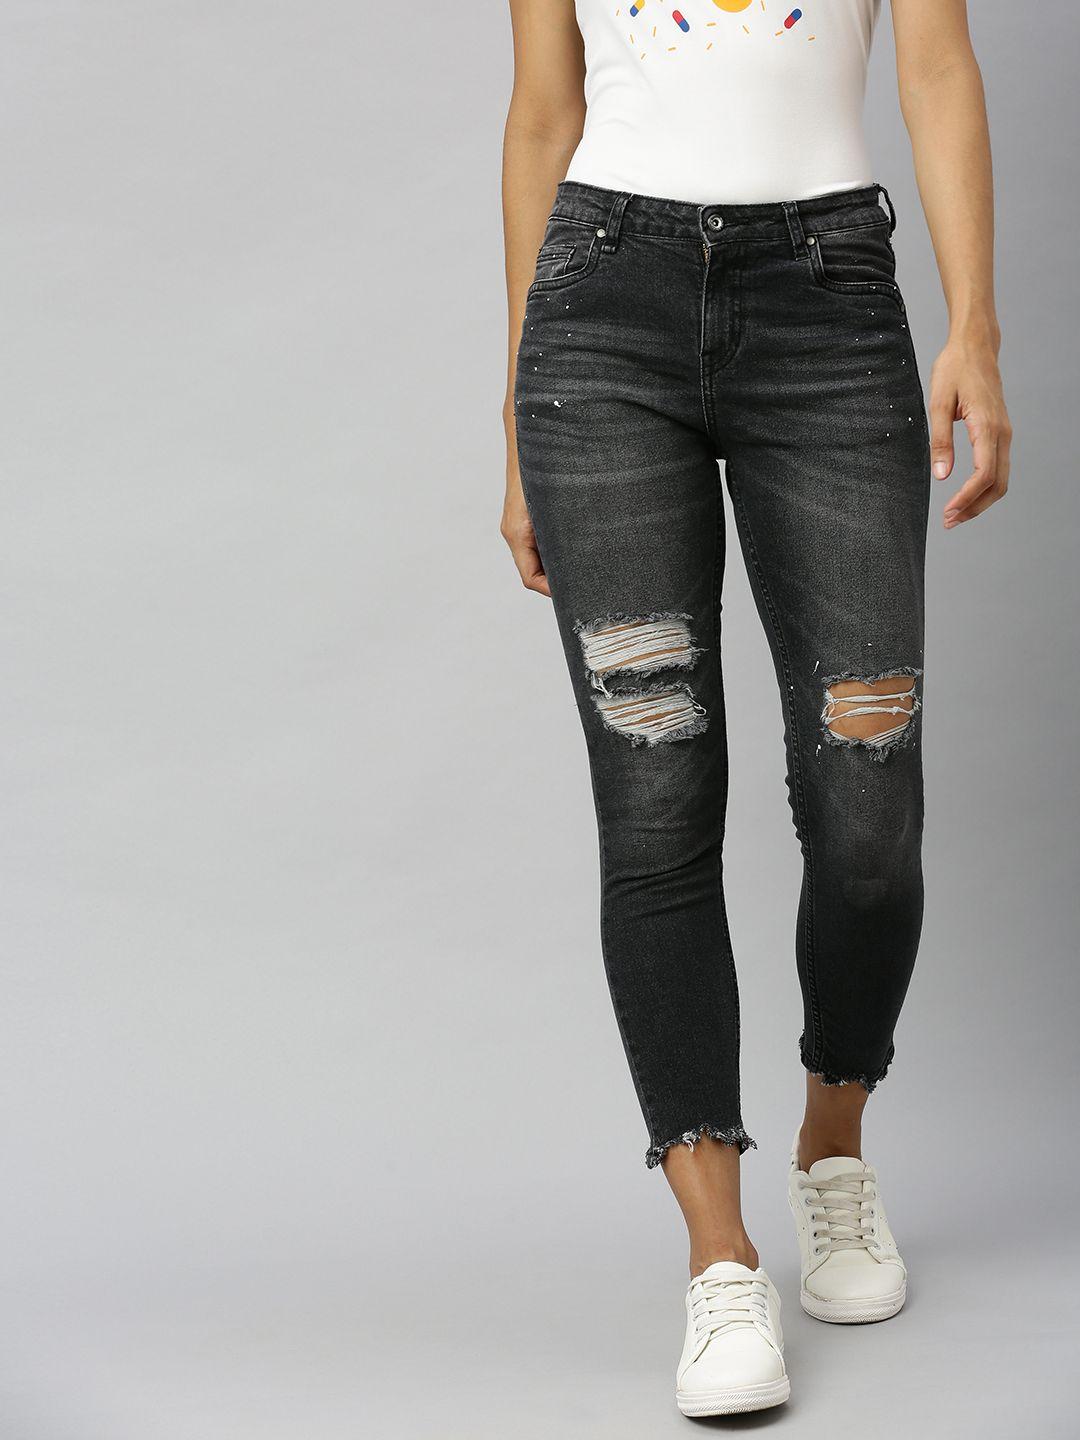 the roadster lifestyle co women black skinny fit mid-rise highly distressed stretchable jeans